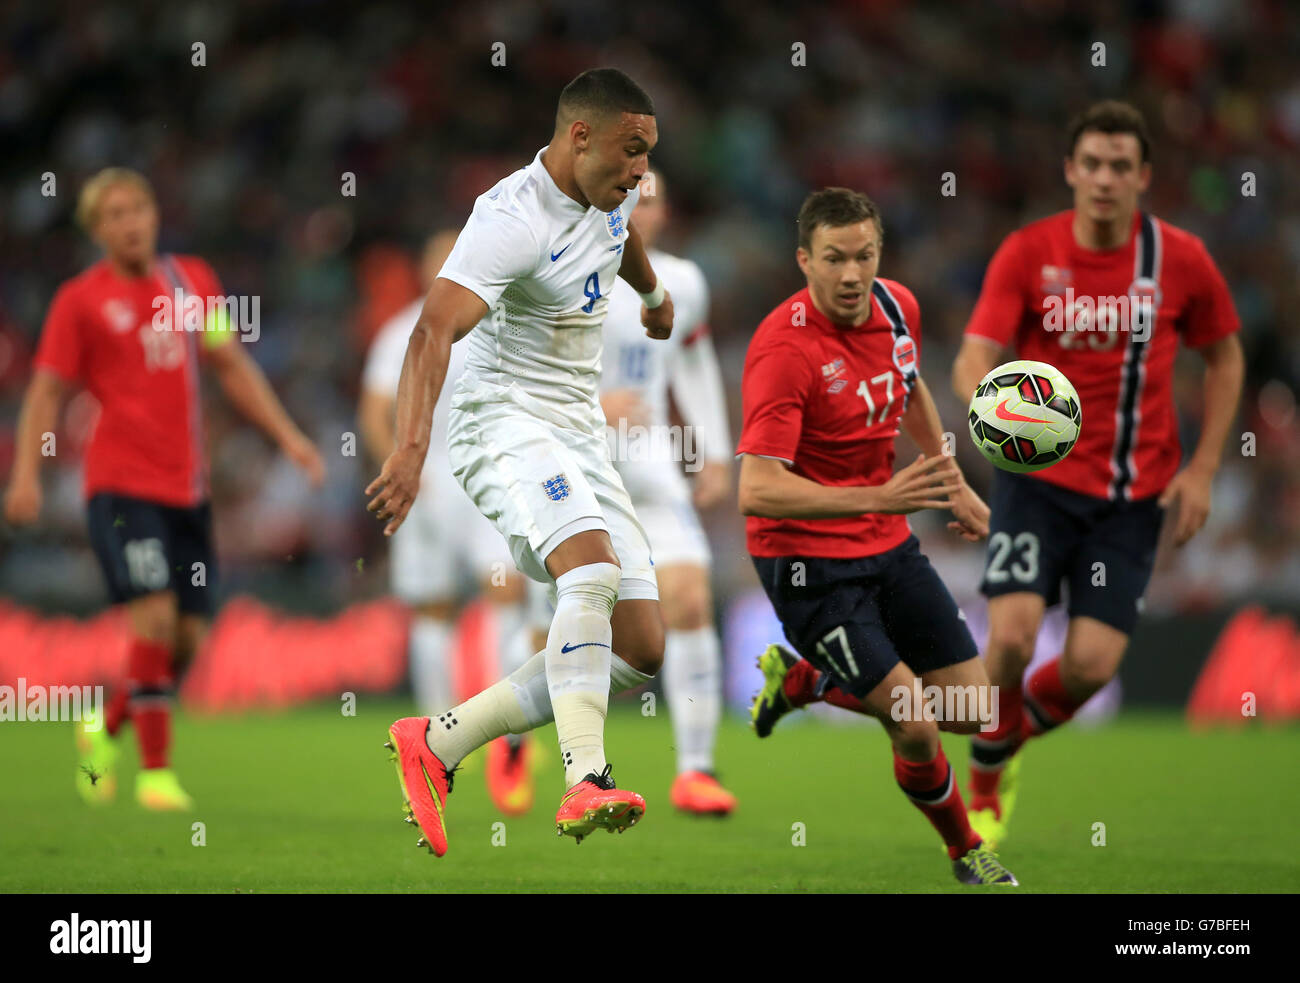 England's Alex Oxlade-Chamberlain (left) and Norway's Martin Linnes (right) battle for the ball the International Friendly at Wembley Stadium, London. PRESS ASSOCIATION Photo. Picture date: Wednesday September 3, 2014. See PA story SOCCER England. Photo credit should read: Nick Potts/PA Wire. Stock Photo